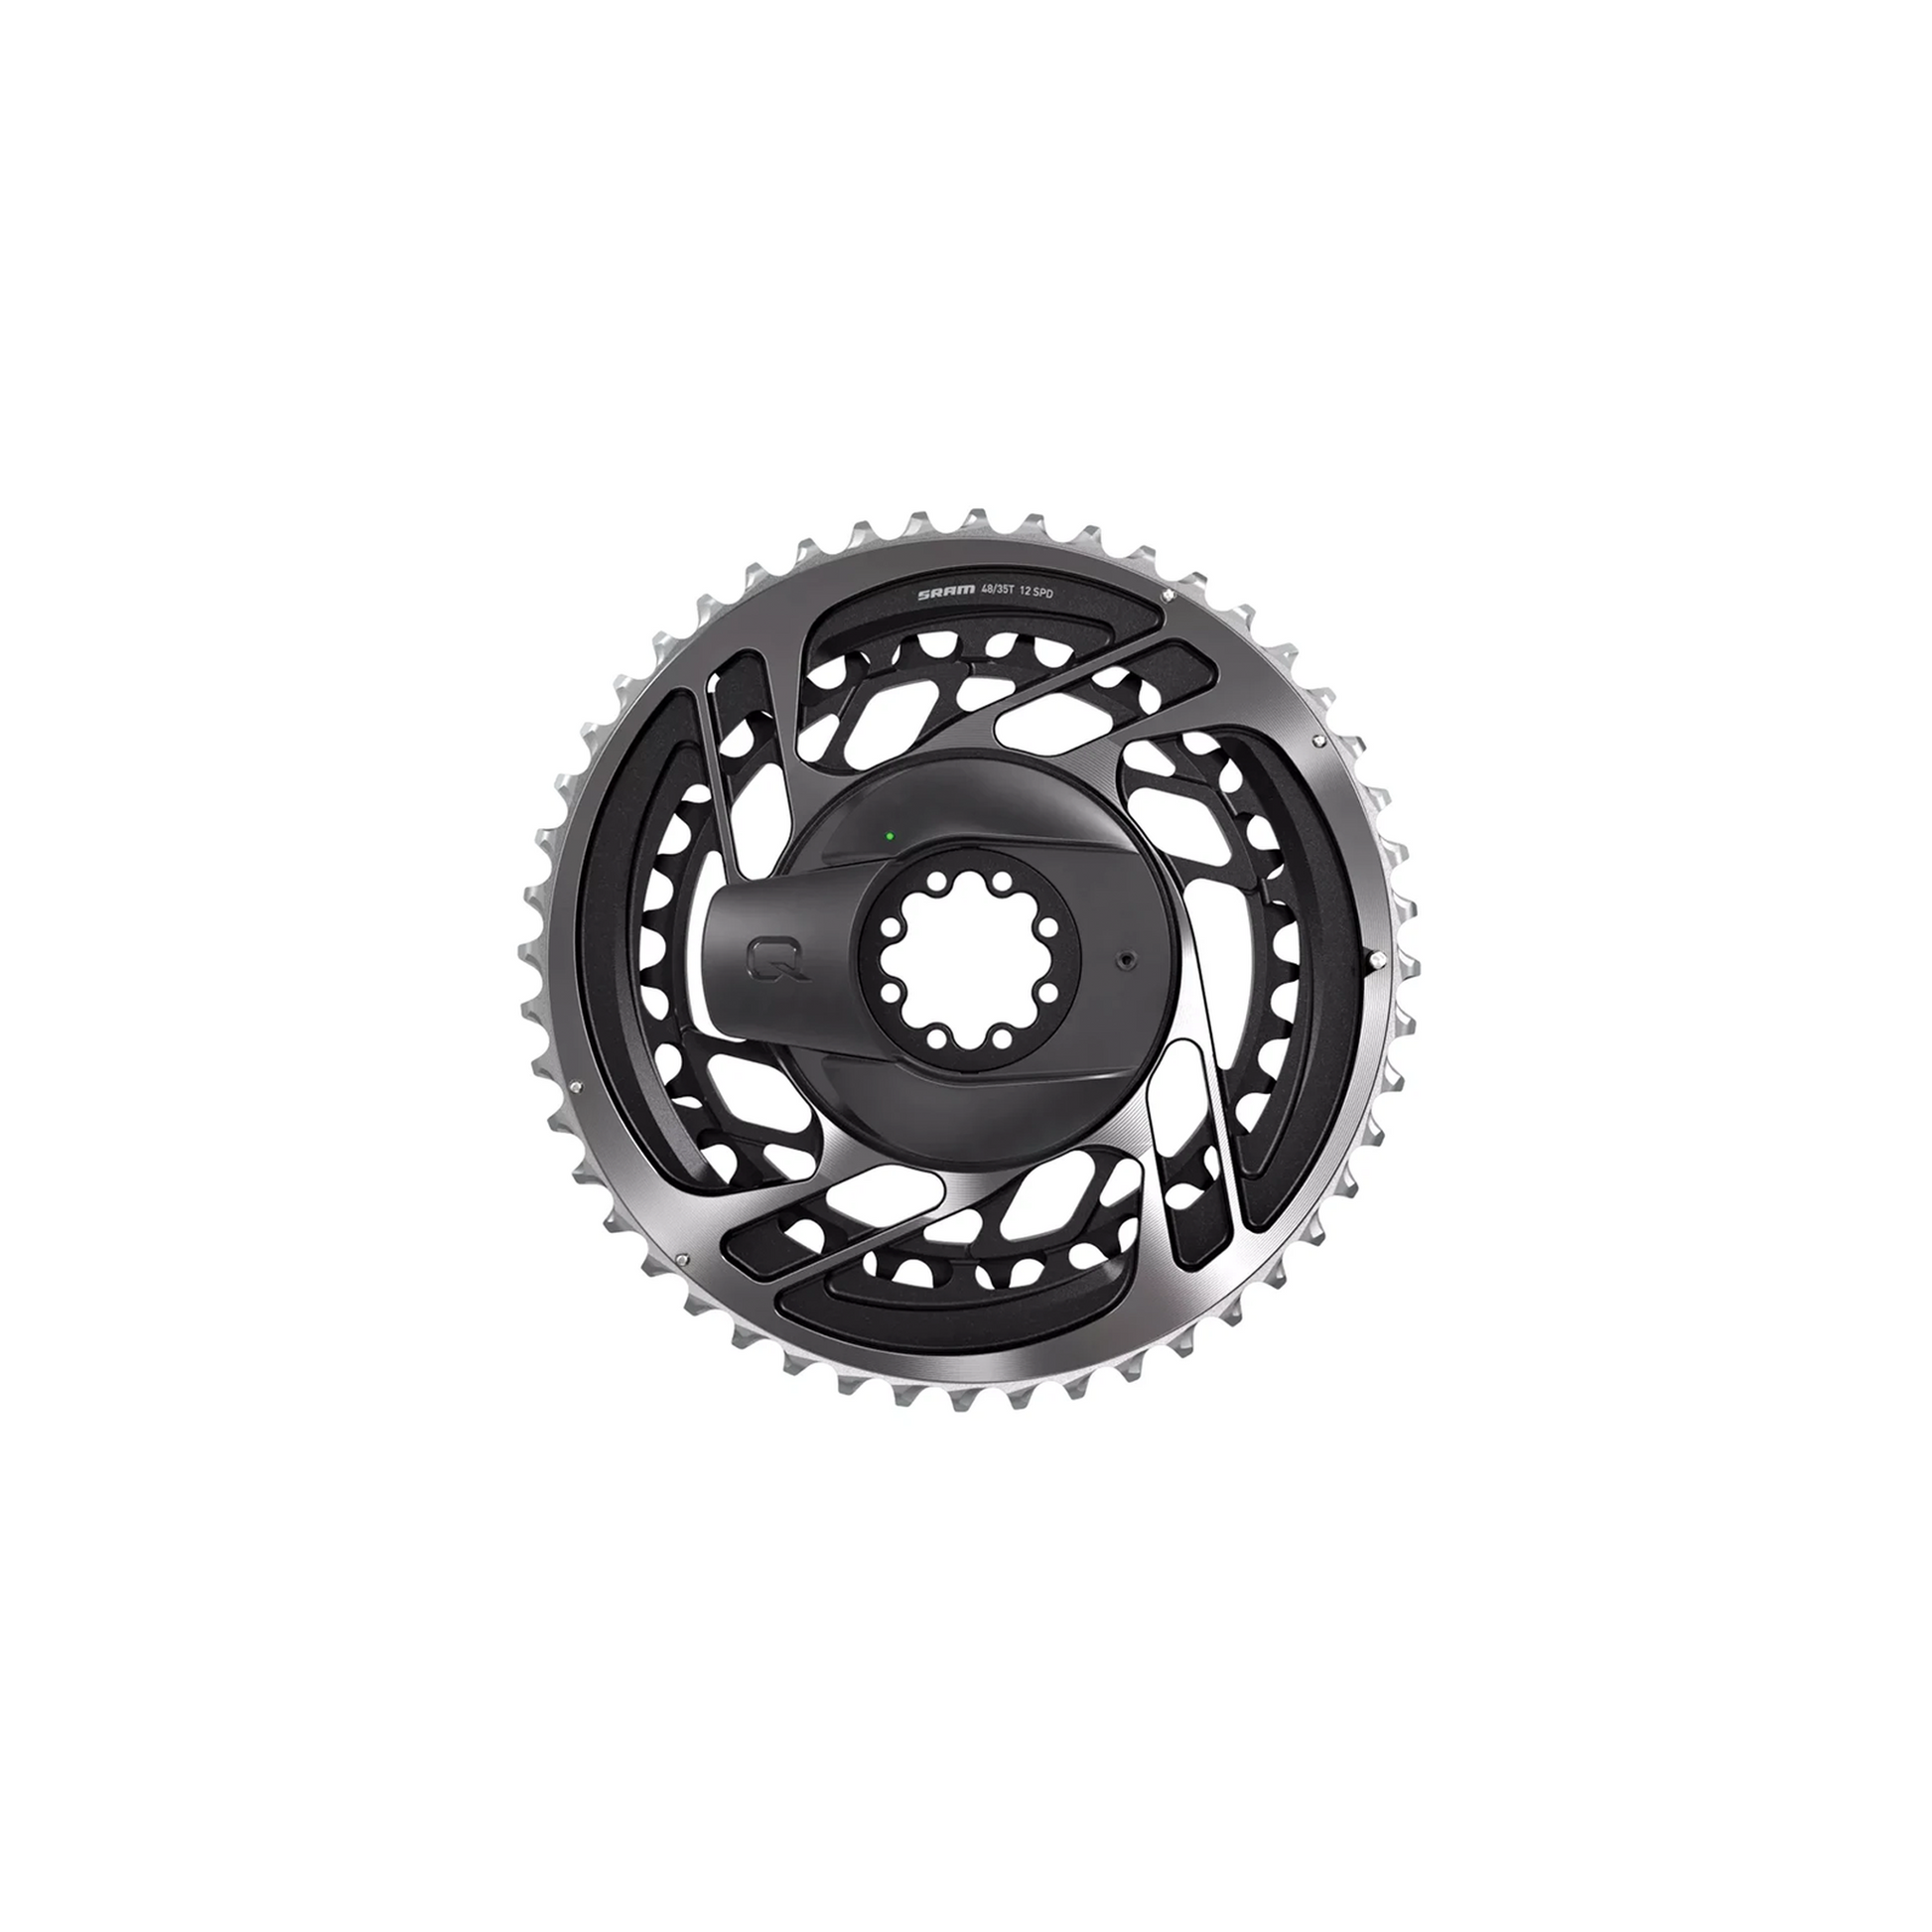 SRAM Red AXS Power Meter Kit | Complete Cyclist - 